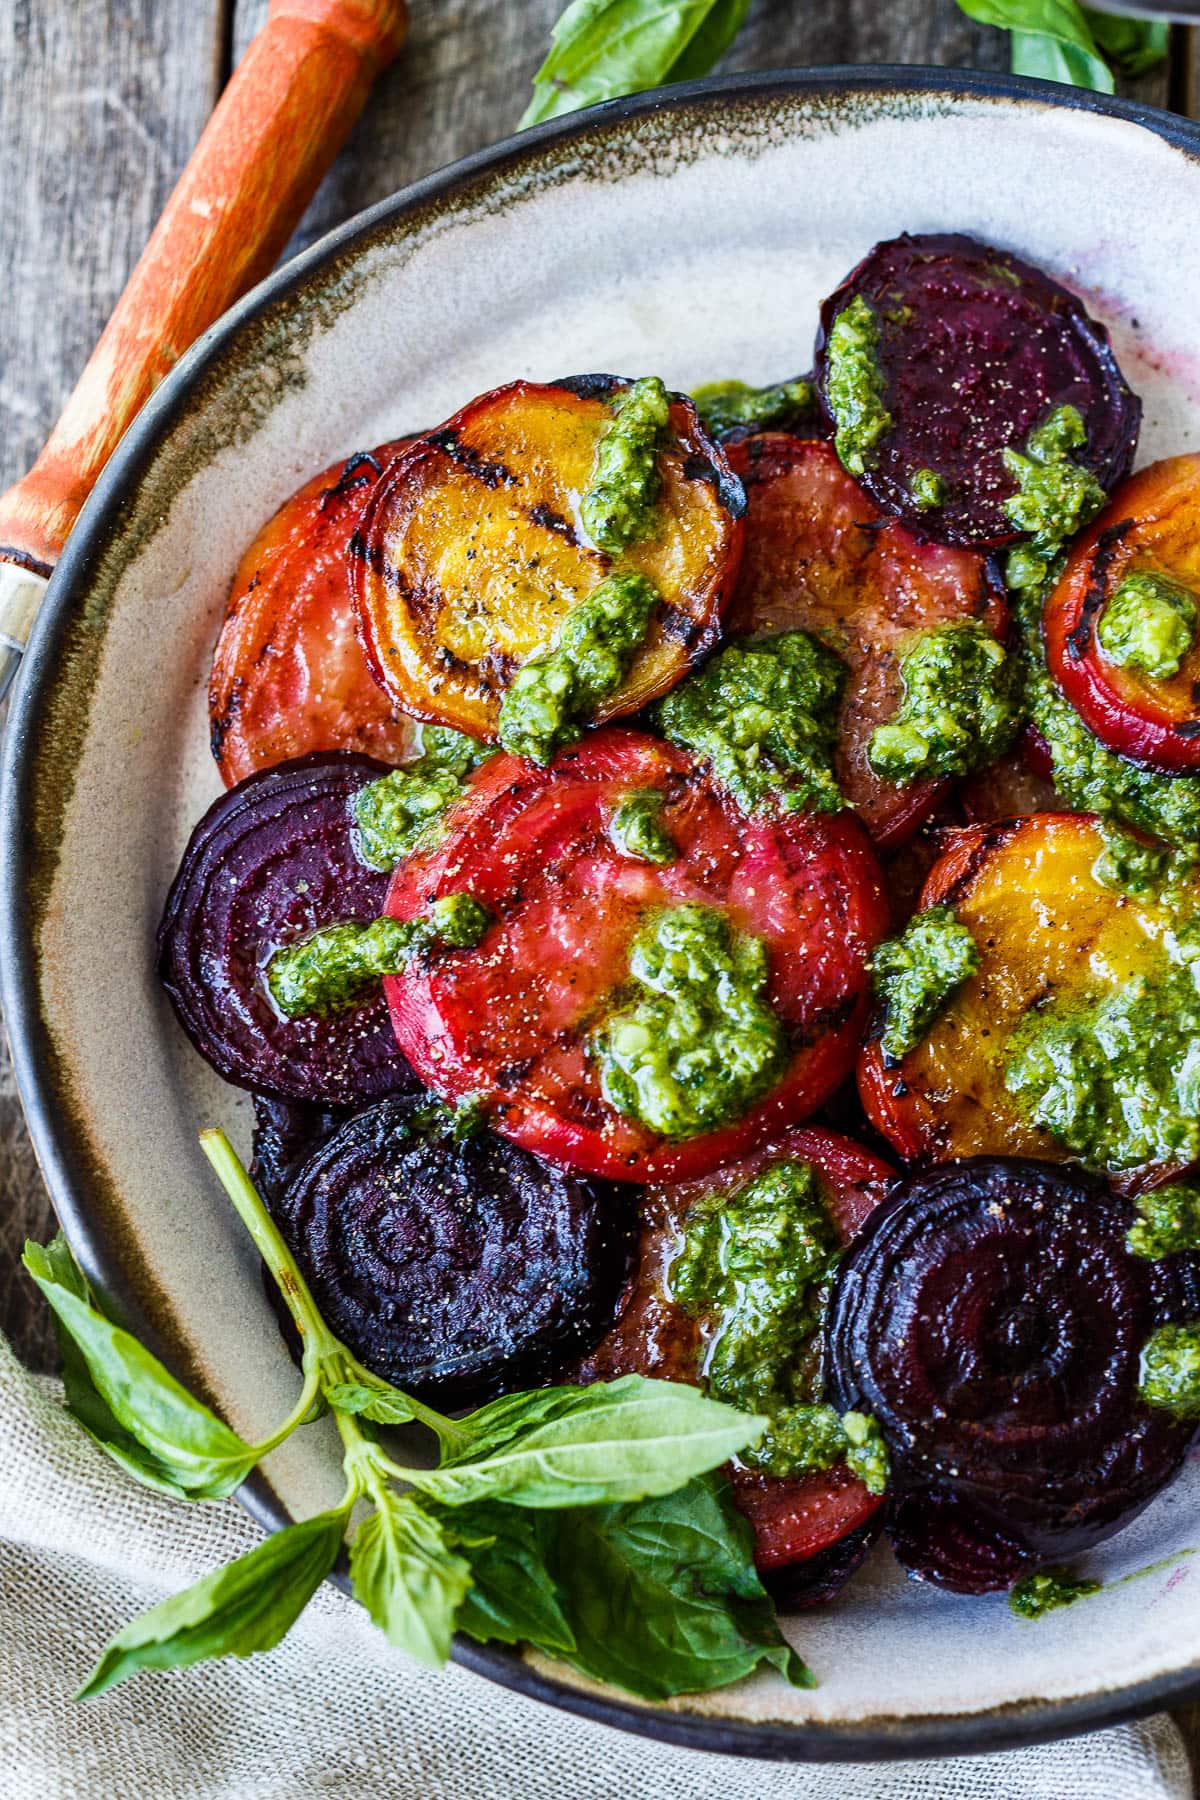 Grilled beets are full of incredible flavor! Here's how to make the most delicious beets, roasted then grilled, topped with basil pesto. 